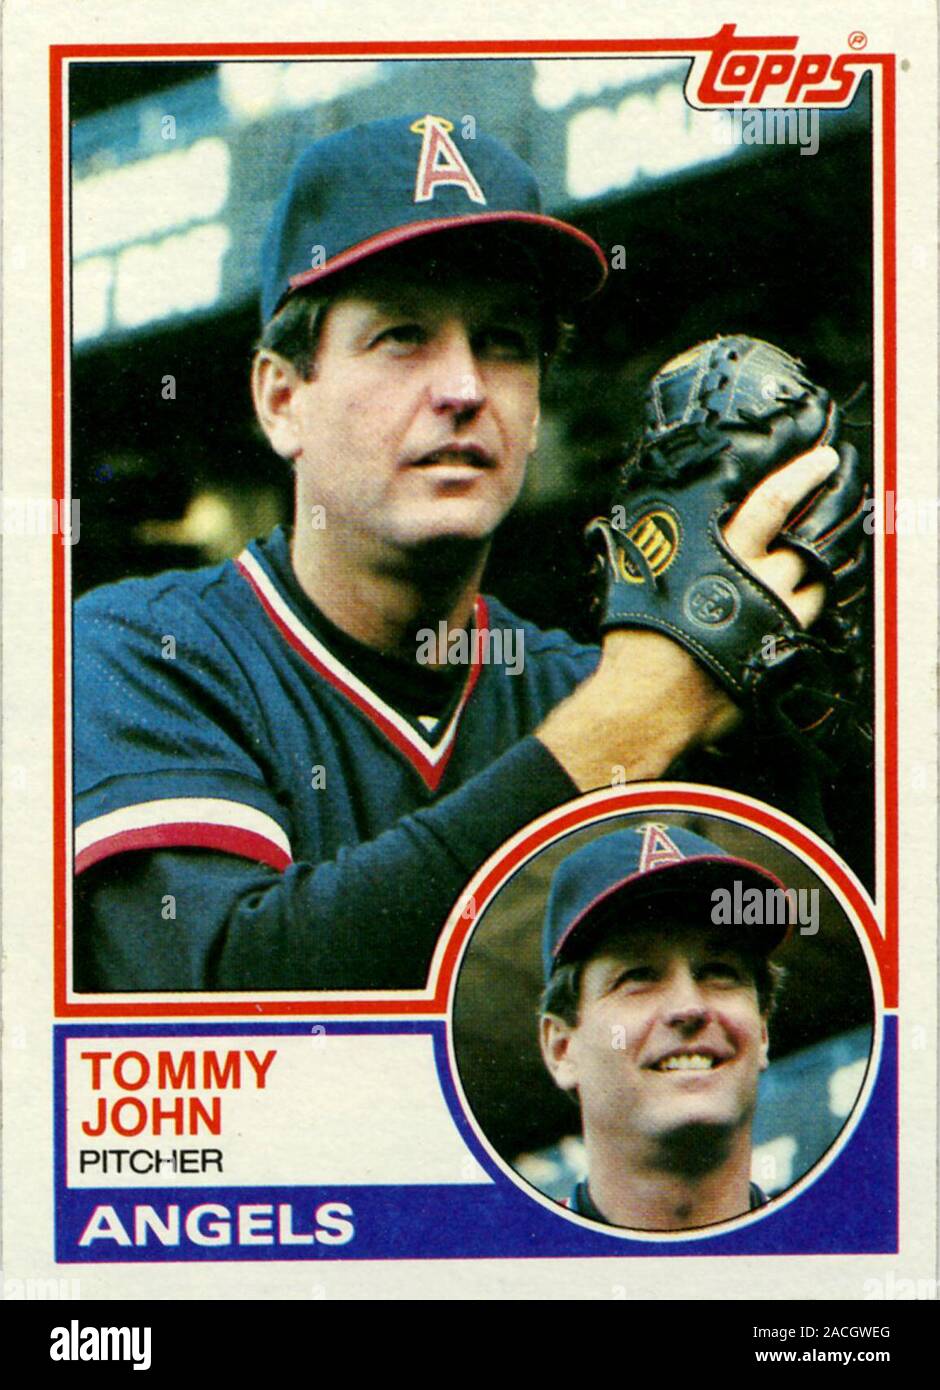 Topps baseball card depicting Tommy John with the California Angels in 1983. Tommy John was a successful Major League pitcher but is best known for a surgery to repair his pitching arm now referred to as Tommy John surgery. Stock Photo